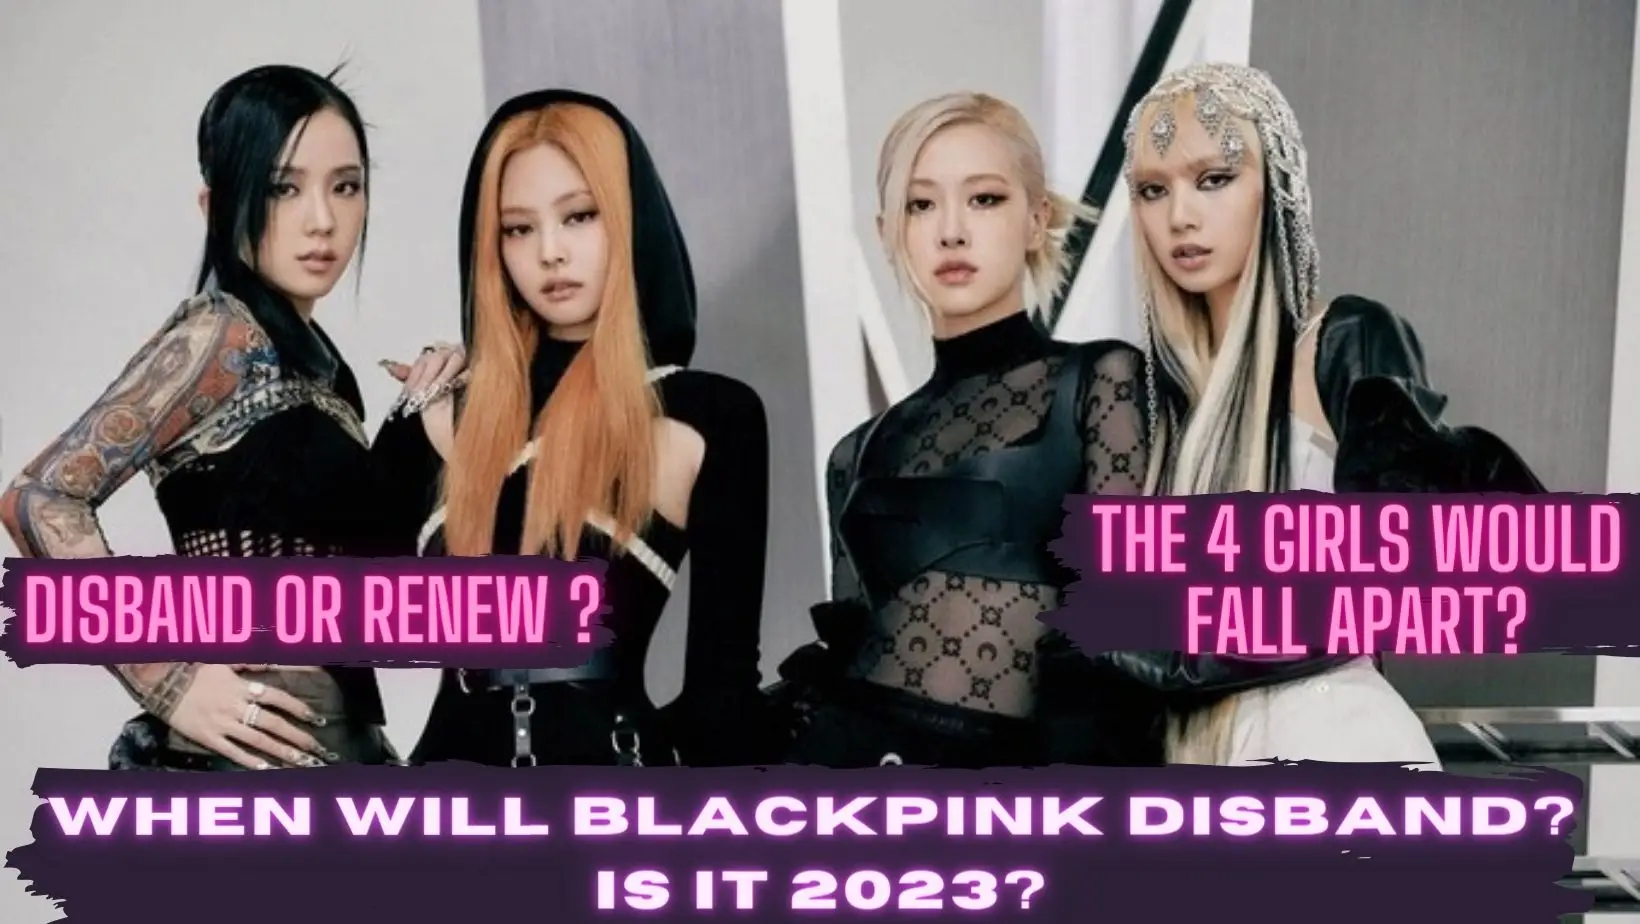 When Will Blackpink Disband? Is It 2023?